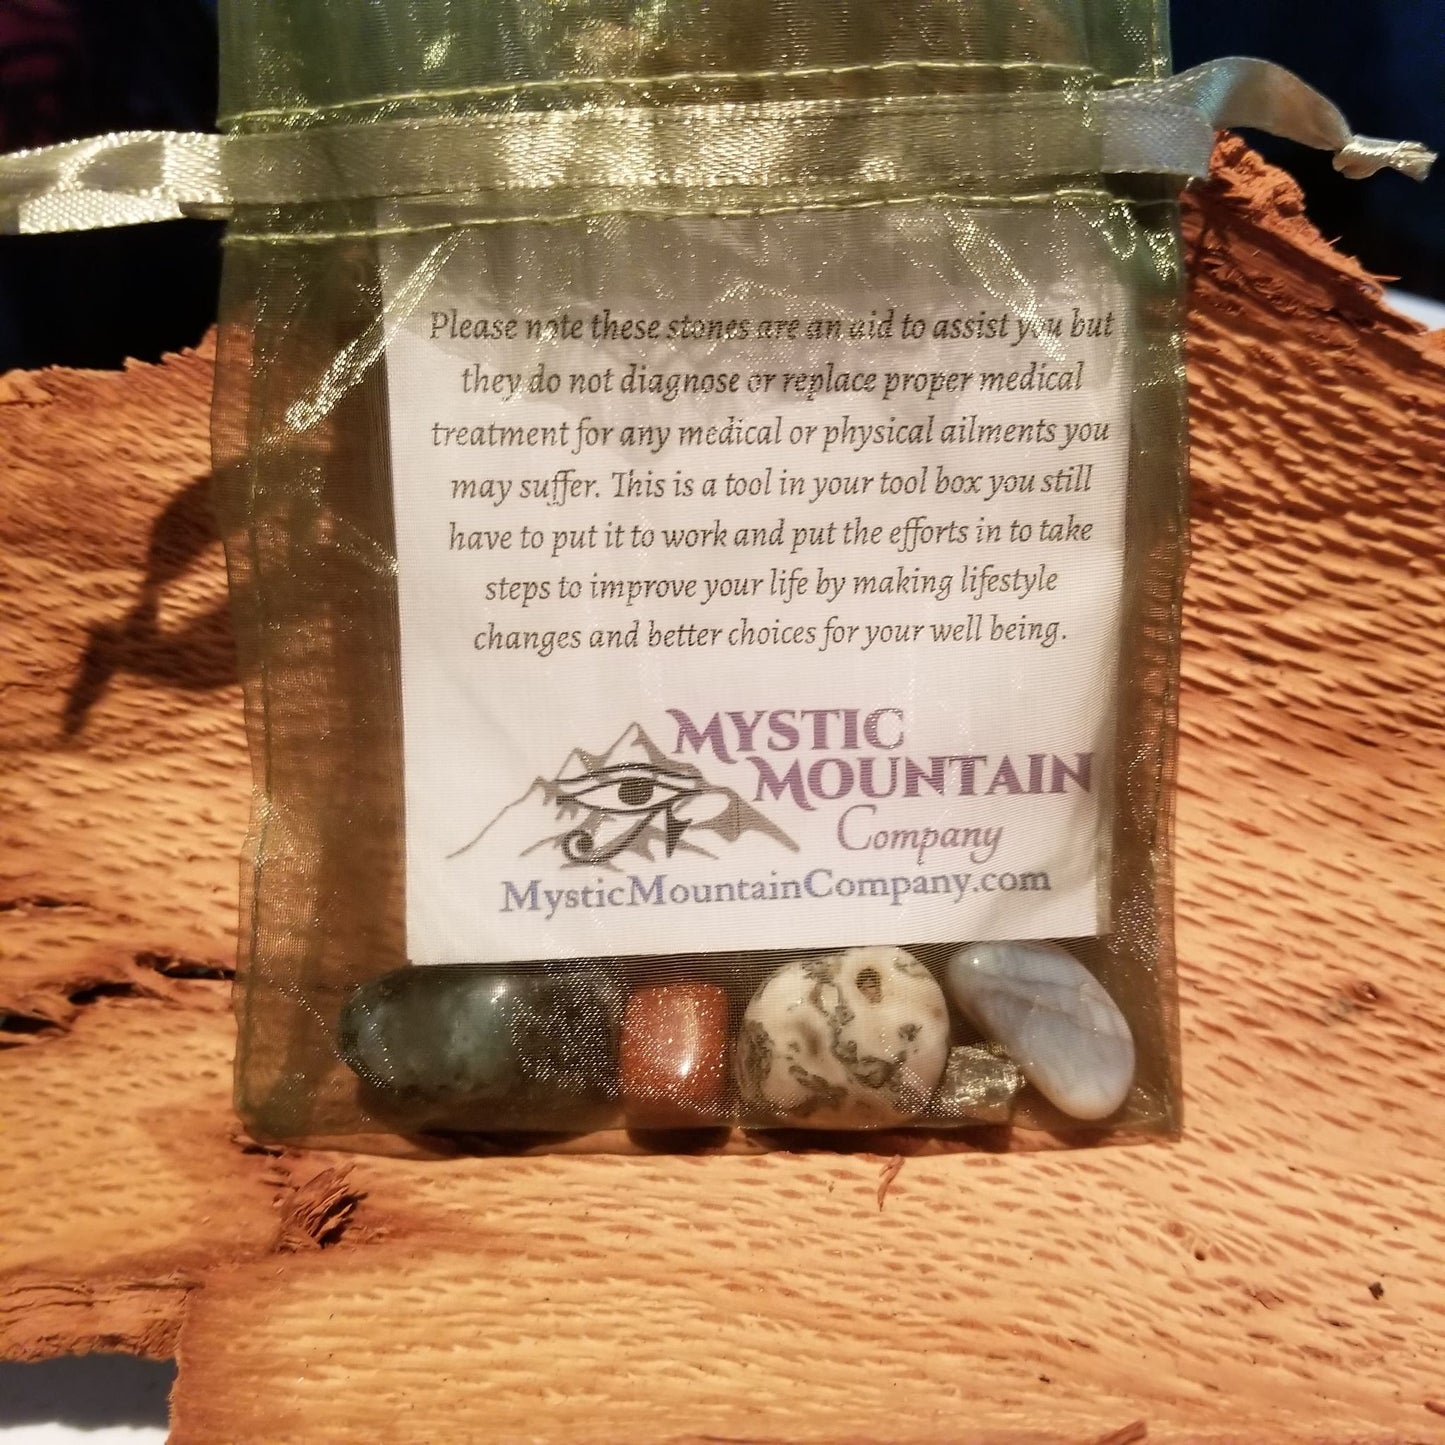 Crystal Intention Pouch, Money Draw